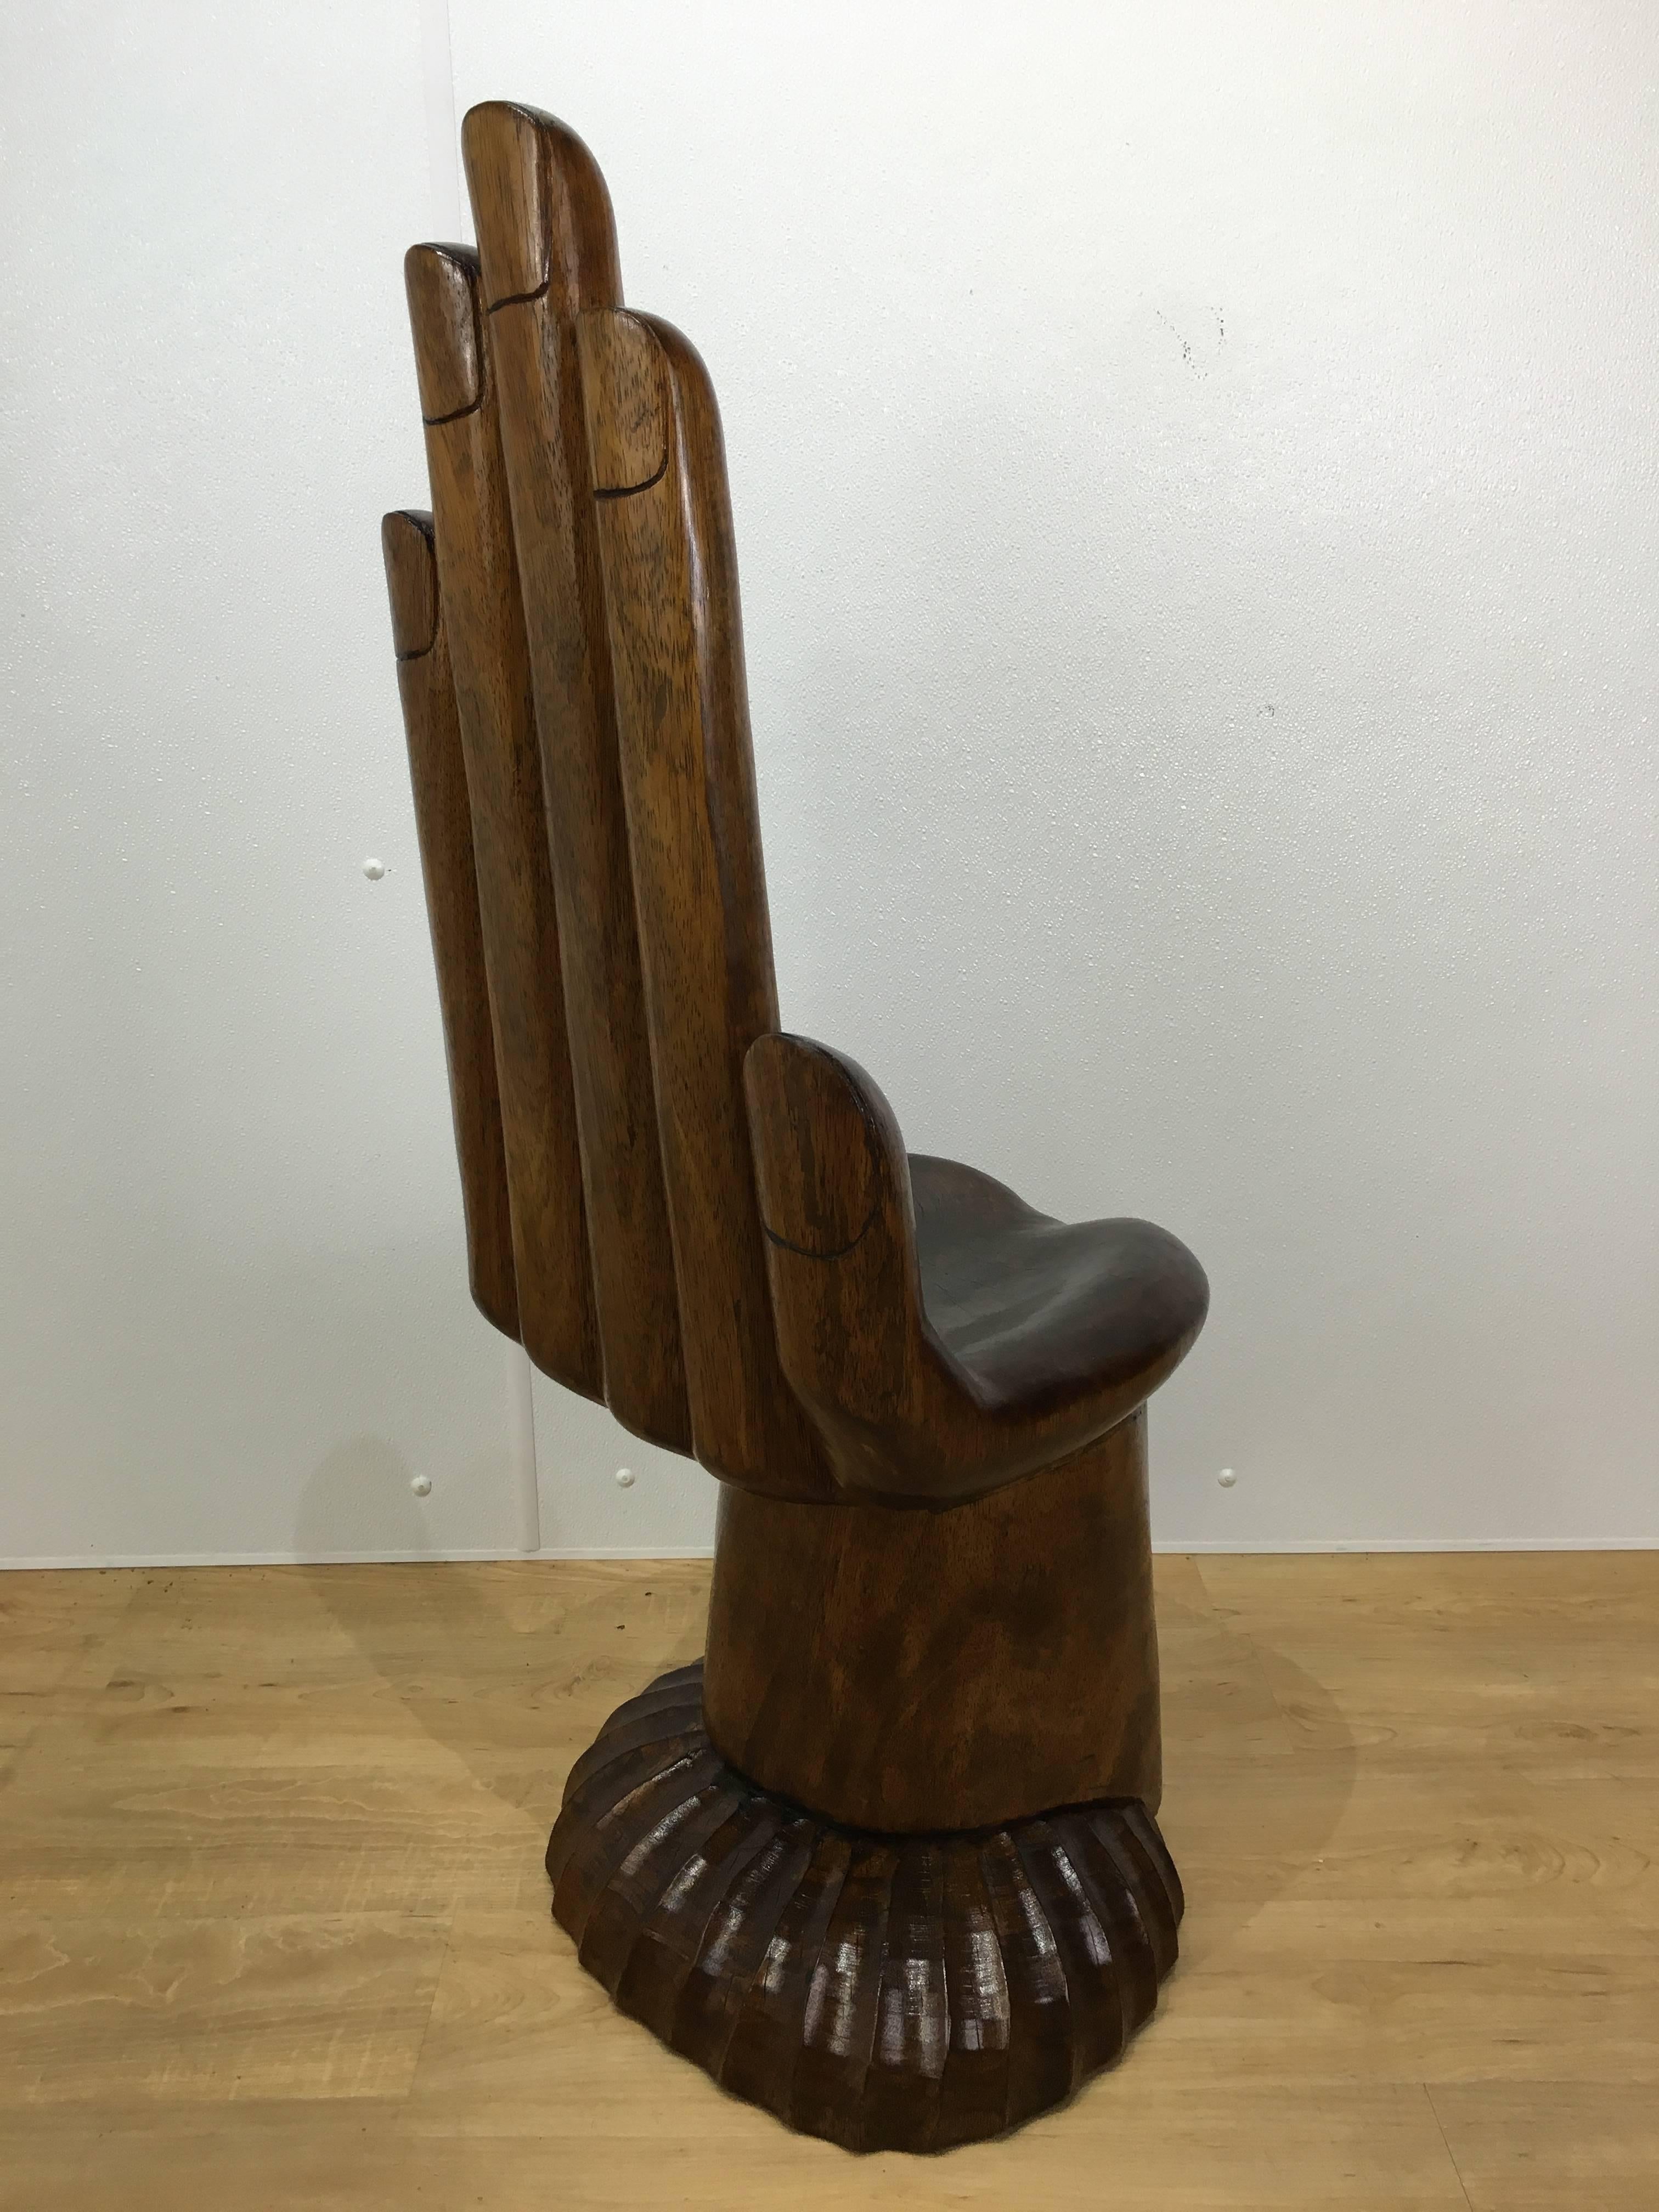 Stunning solid carved mahogany hand chair in the style of Pedro Friedeberg. Rich finish shows the wonderful variations and details in the wood. Unmarked.